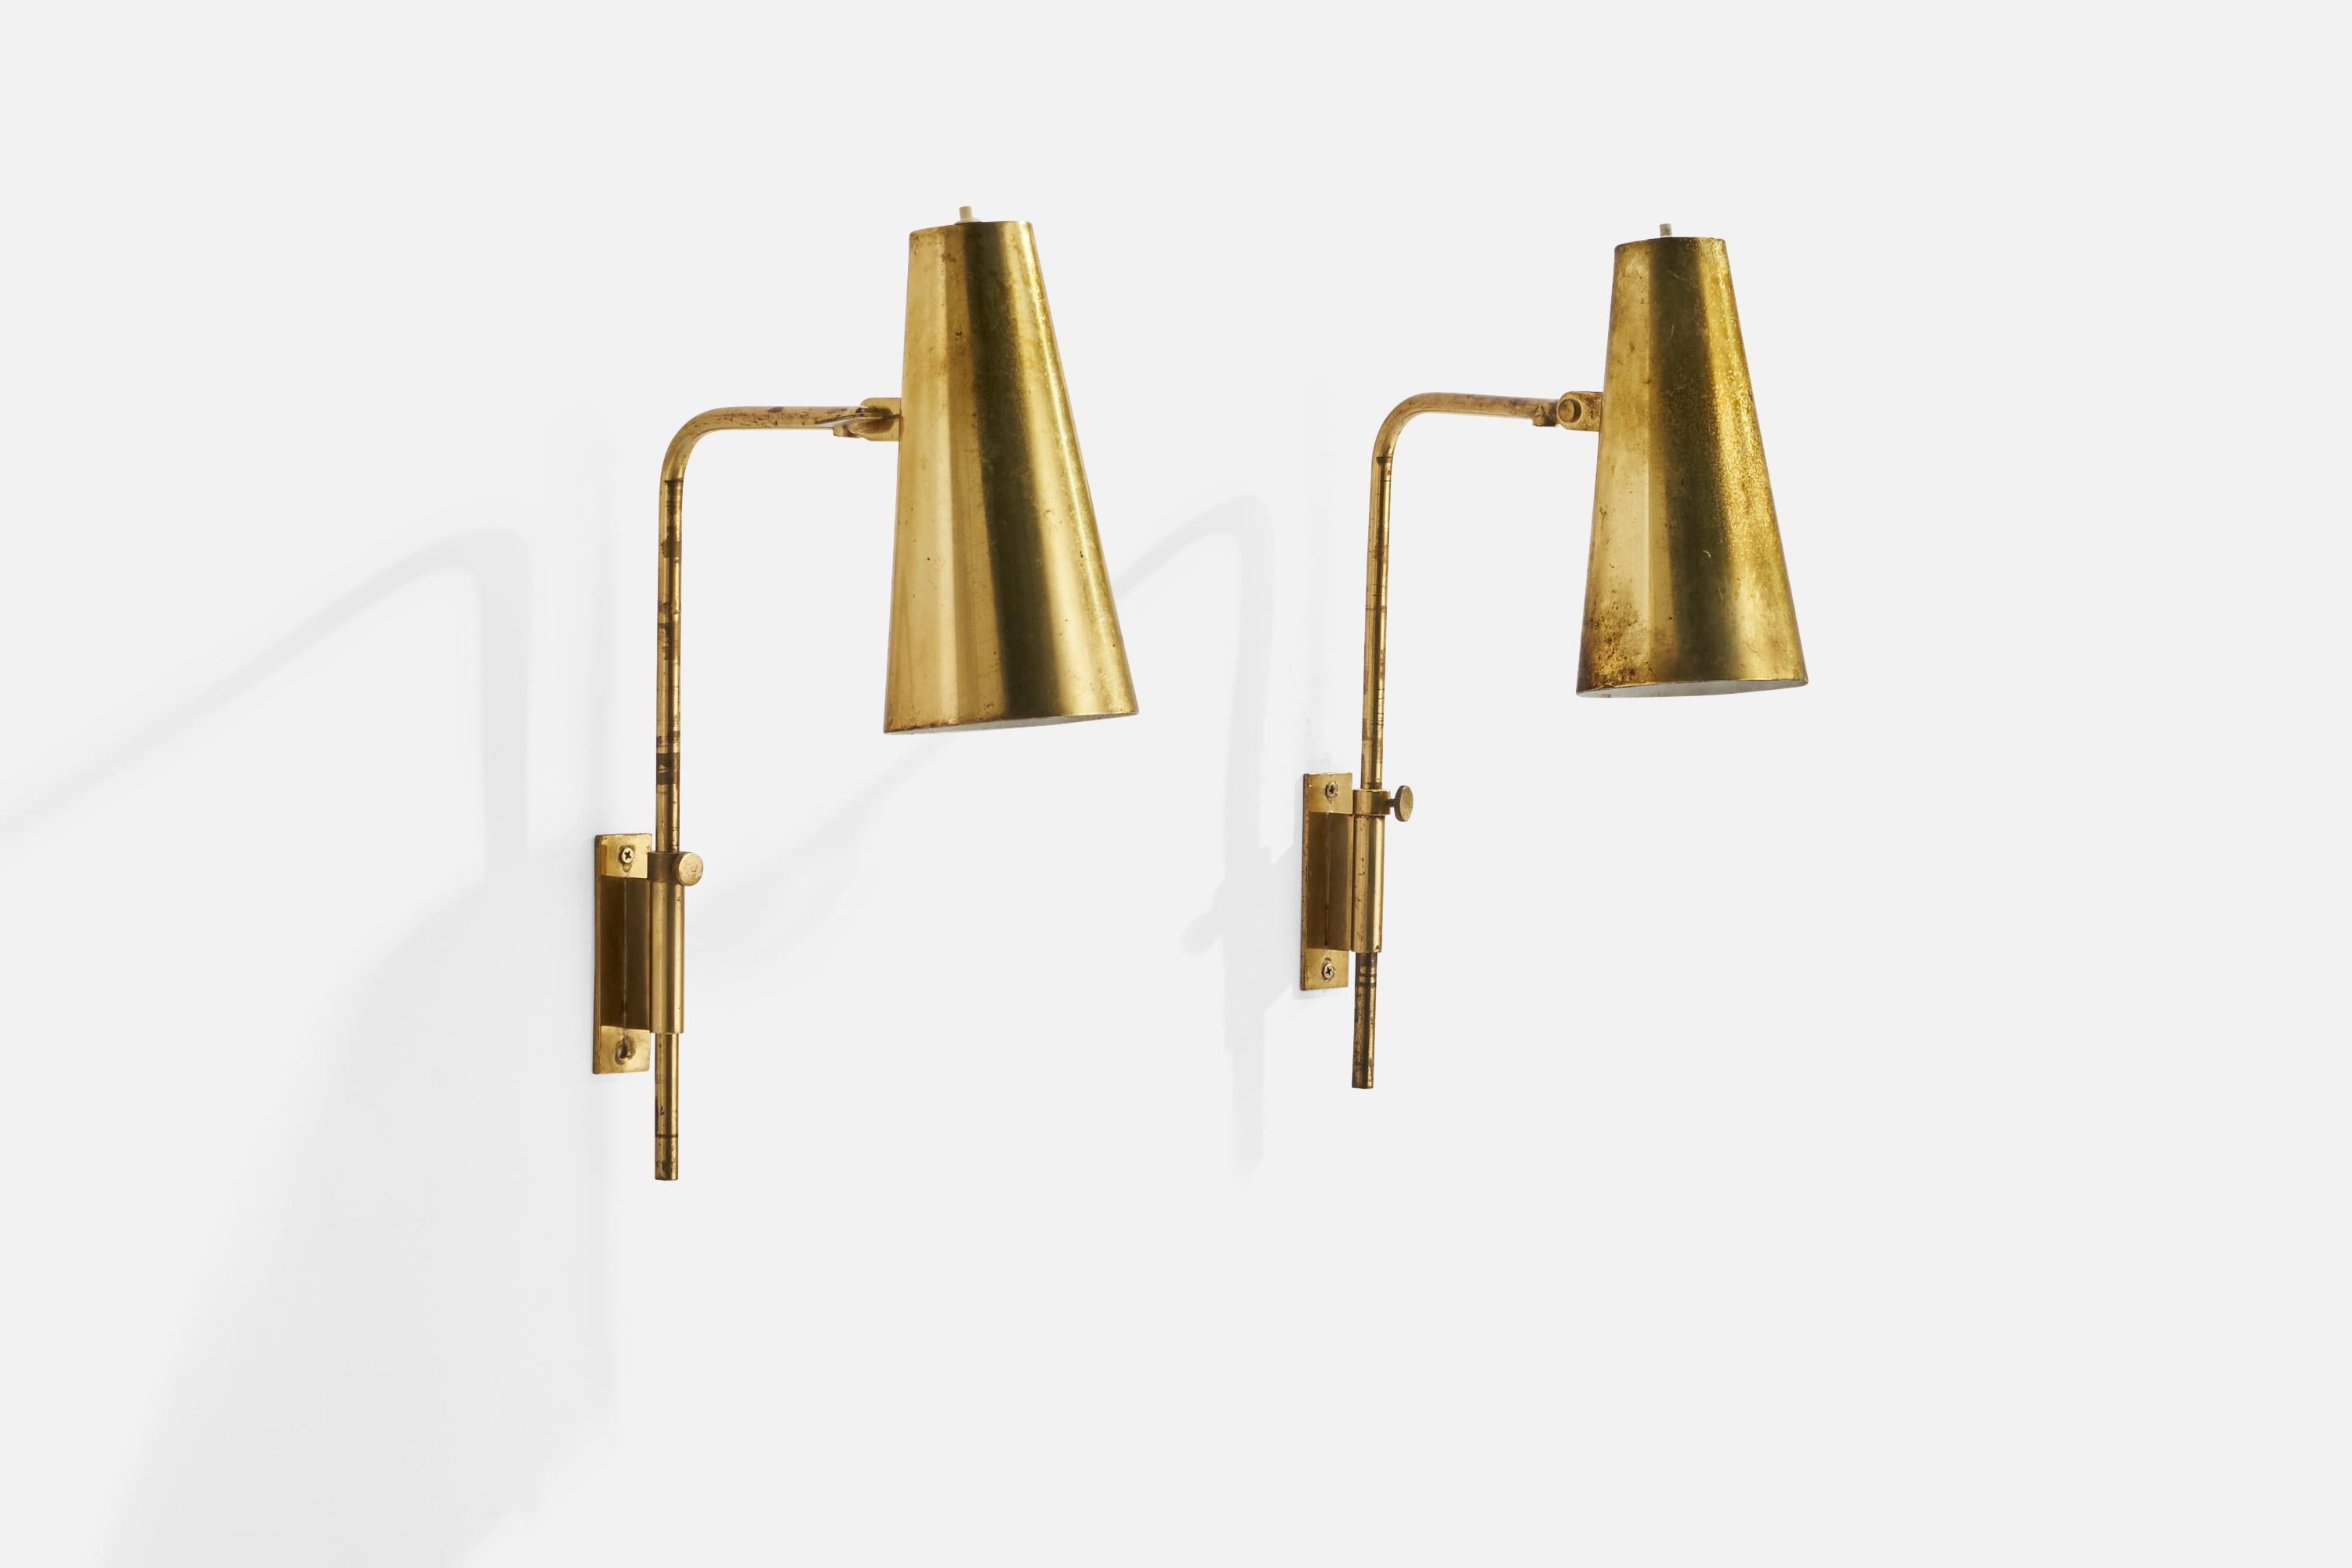 A pair of adjustable brass wall lights designed by Paavo Tynell and produced by Taito OY, Finland, 1950s.

Overall Dimensions (inches): 15.75”  H x 3.78” W x 12.21” D
Back Plate Dimensions (inches): 3.75” H x 1.25” W x .25” D
Bulb Specifications: